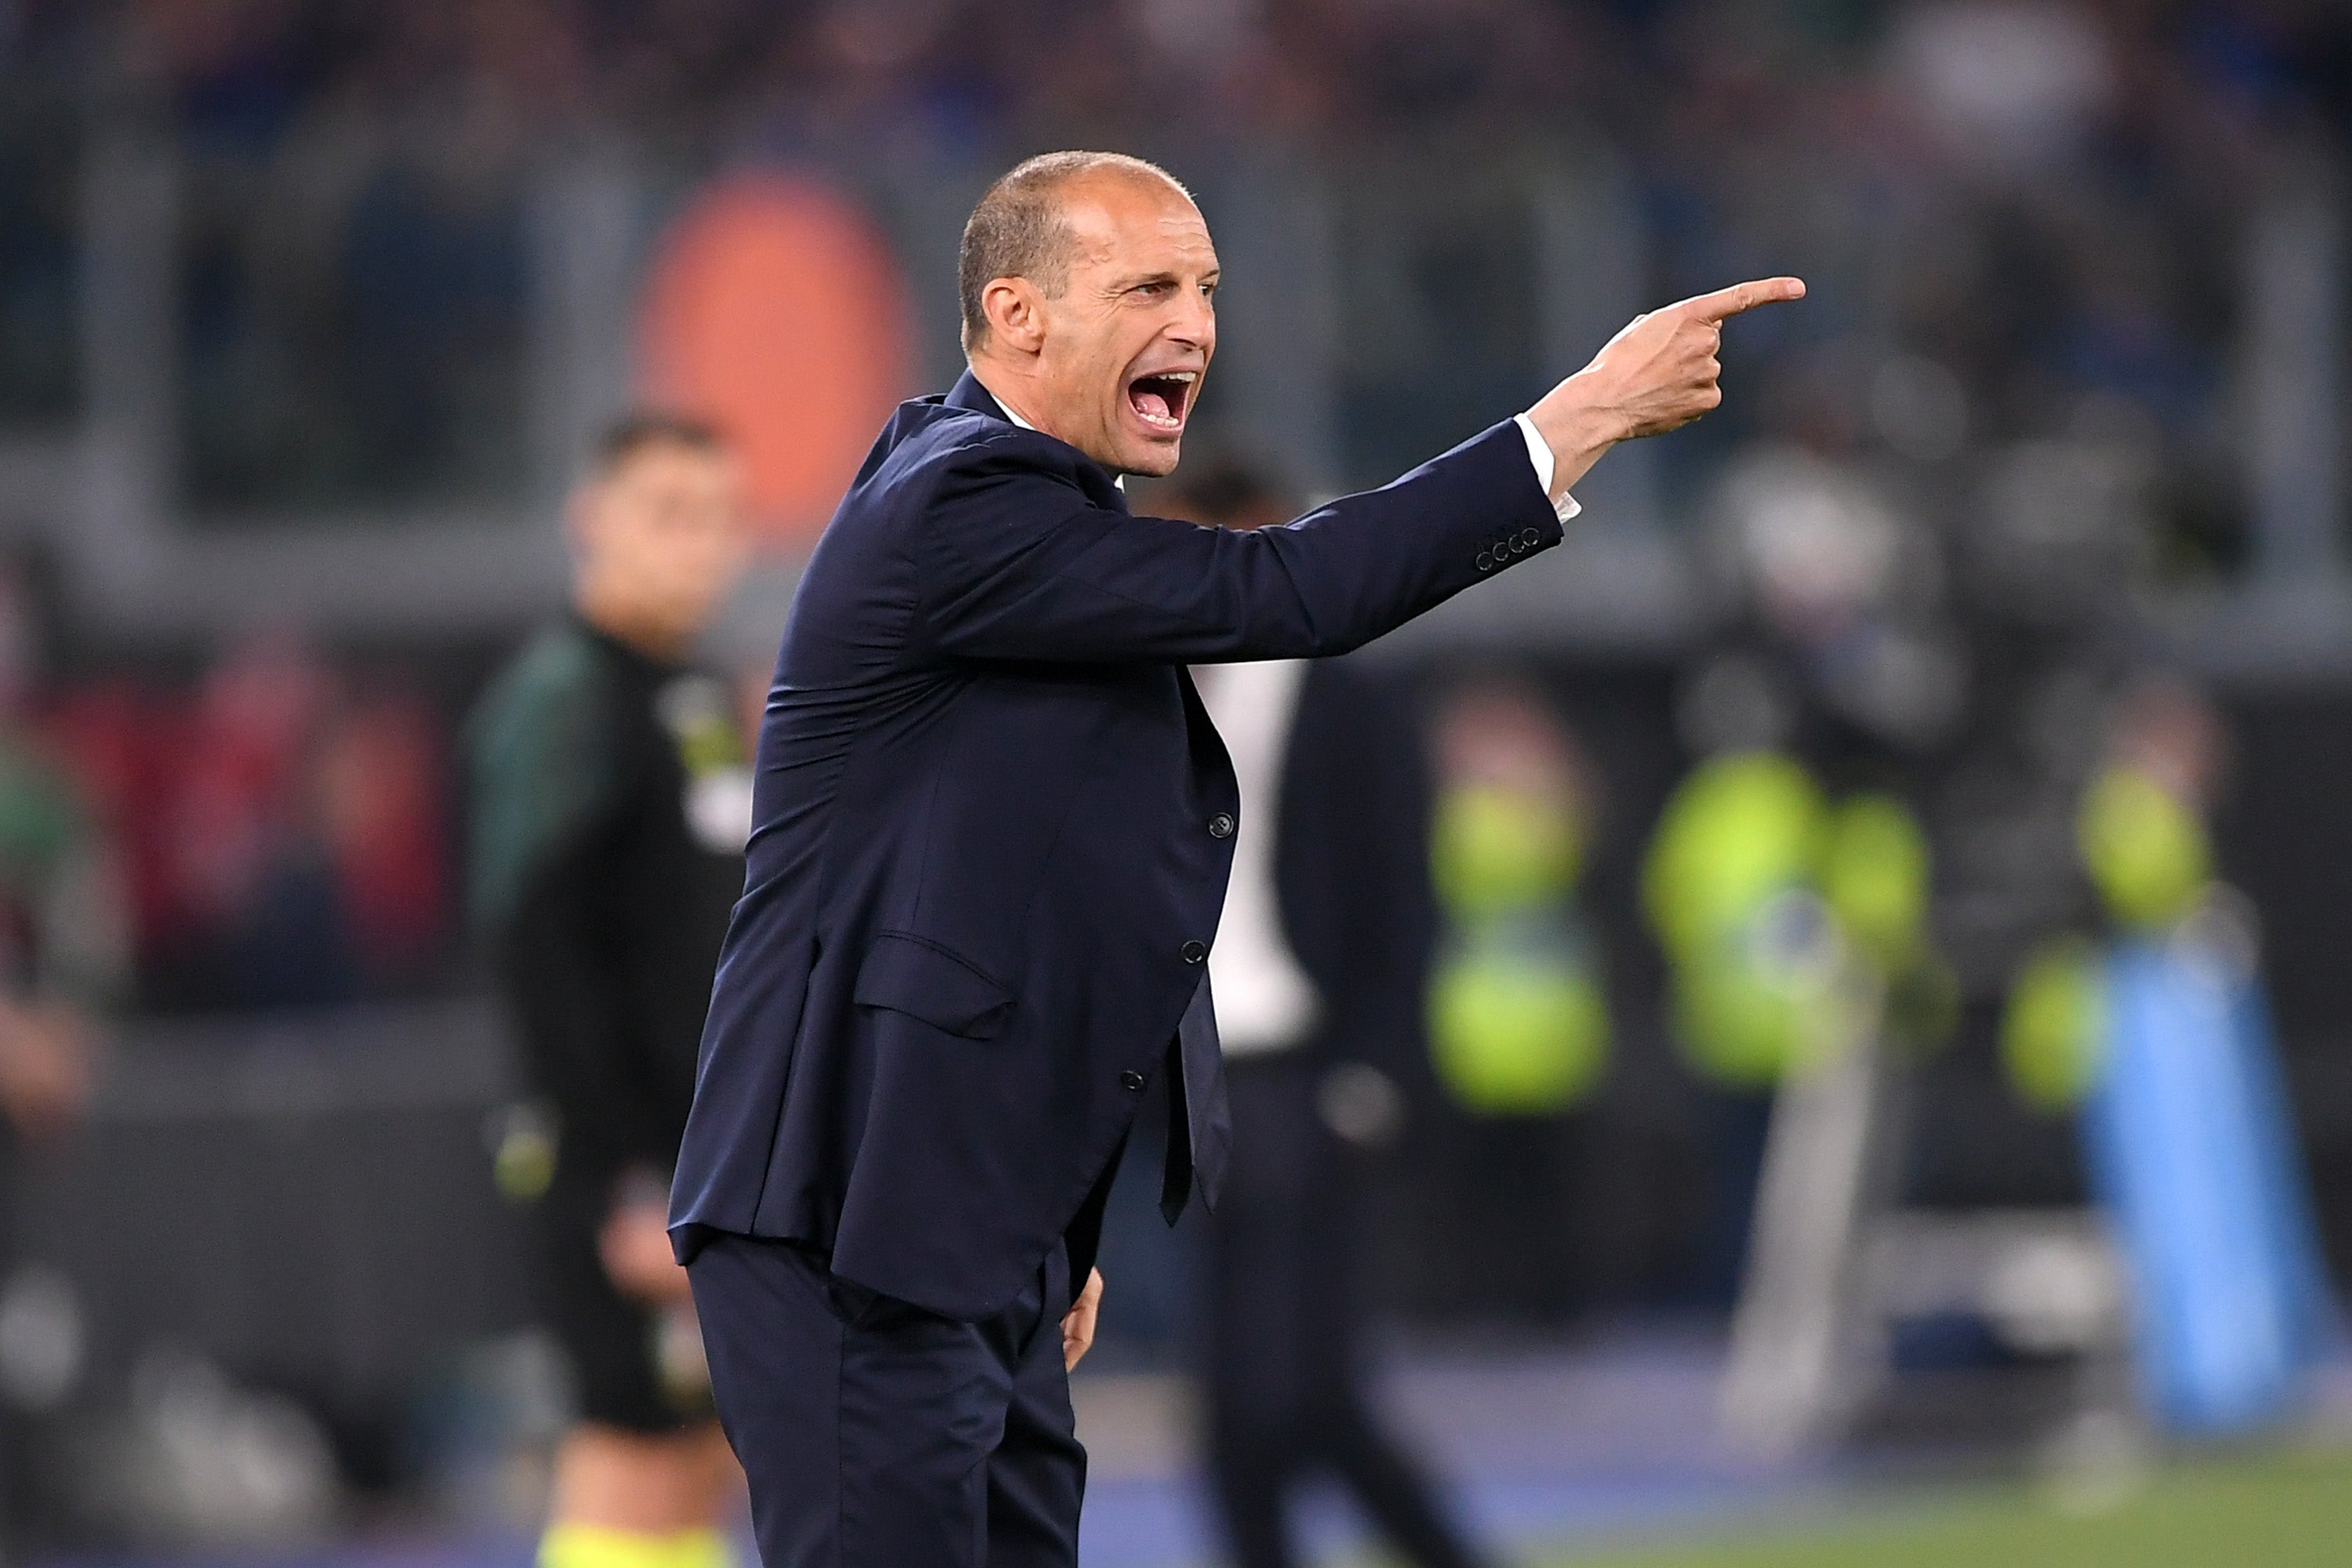 Massimiliano Allegri has gone trophyless in his first season back in charge of Juventus